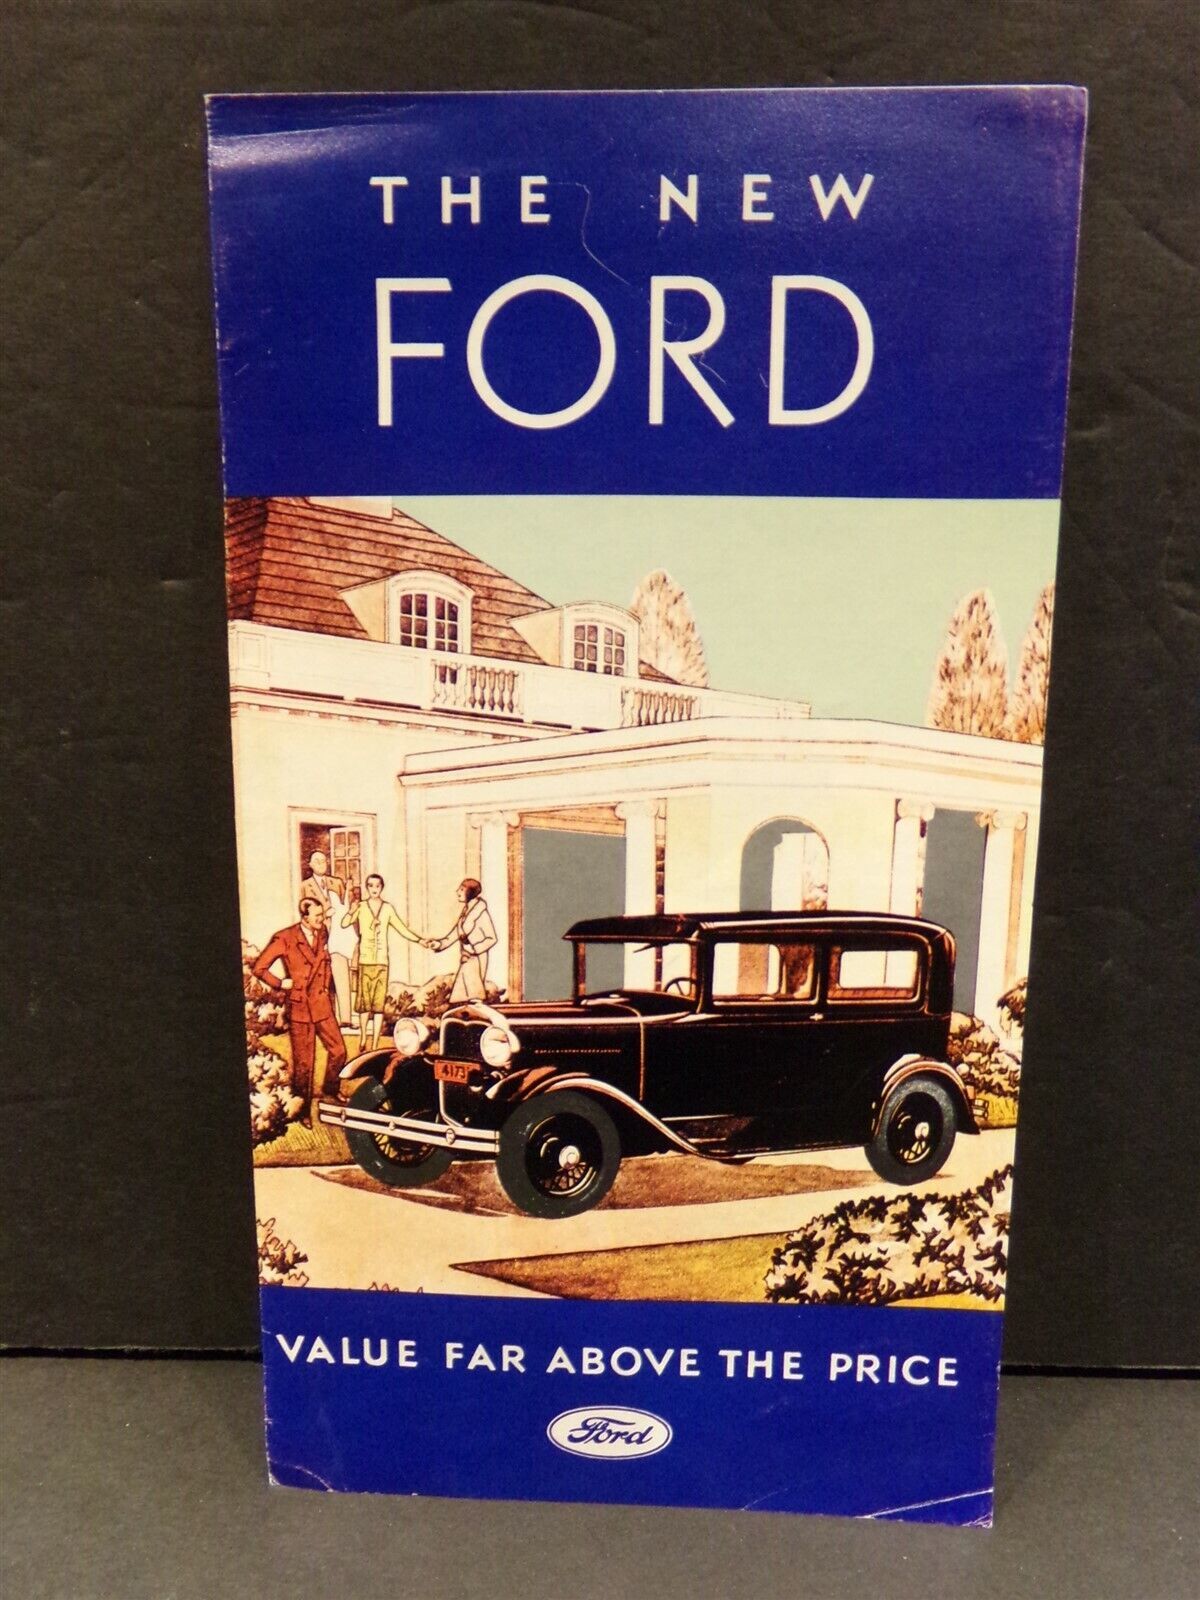 Primary image for The New Ford Sales Brochure 1932